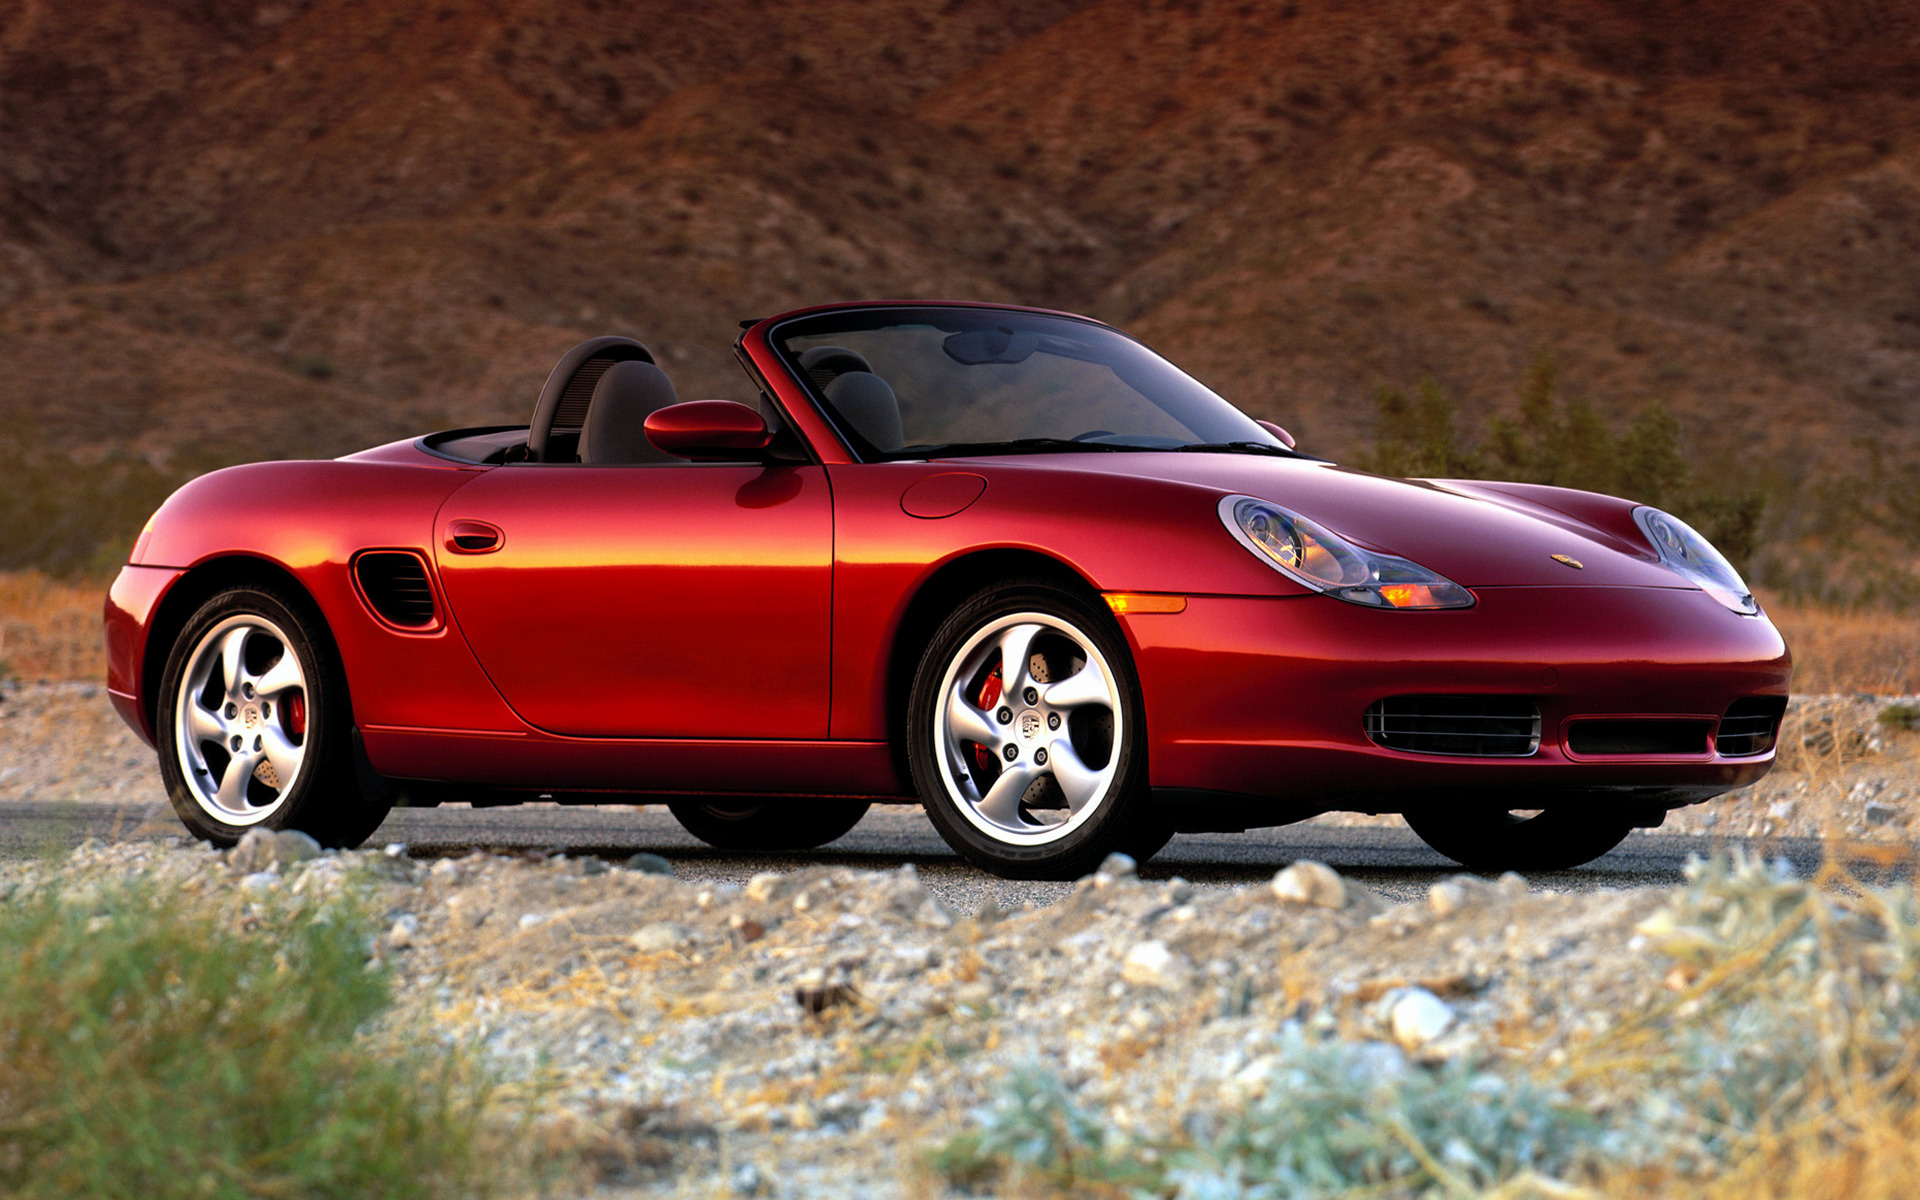 Porsche Boxster S (2000) – Specifications